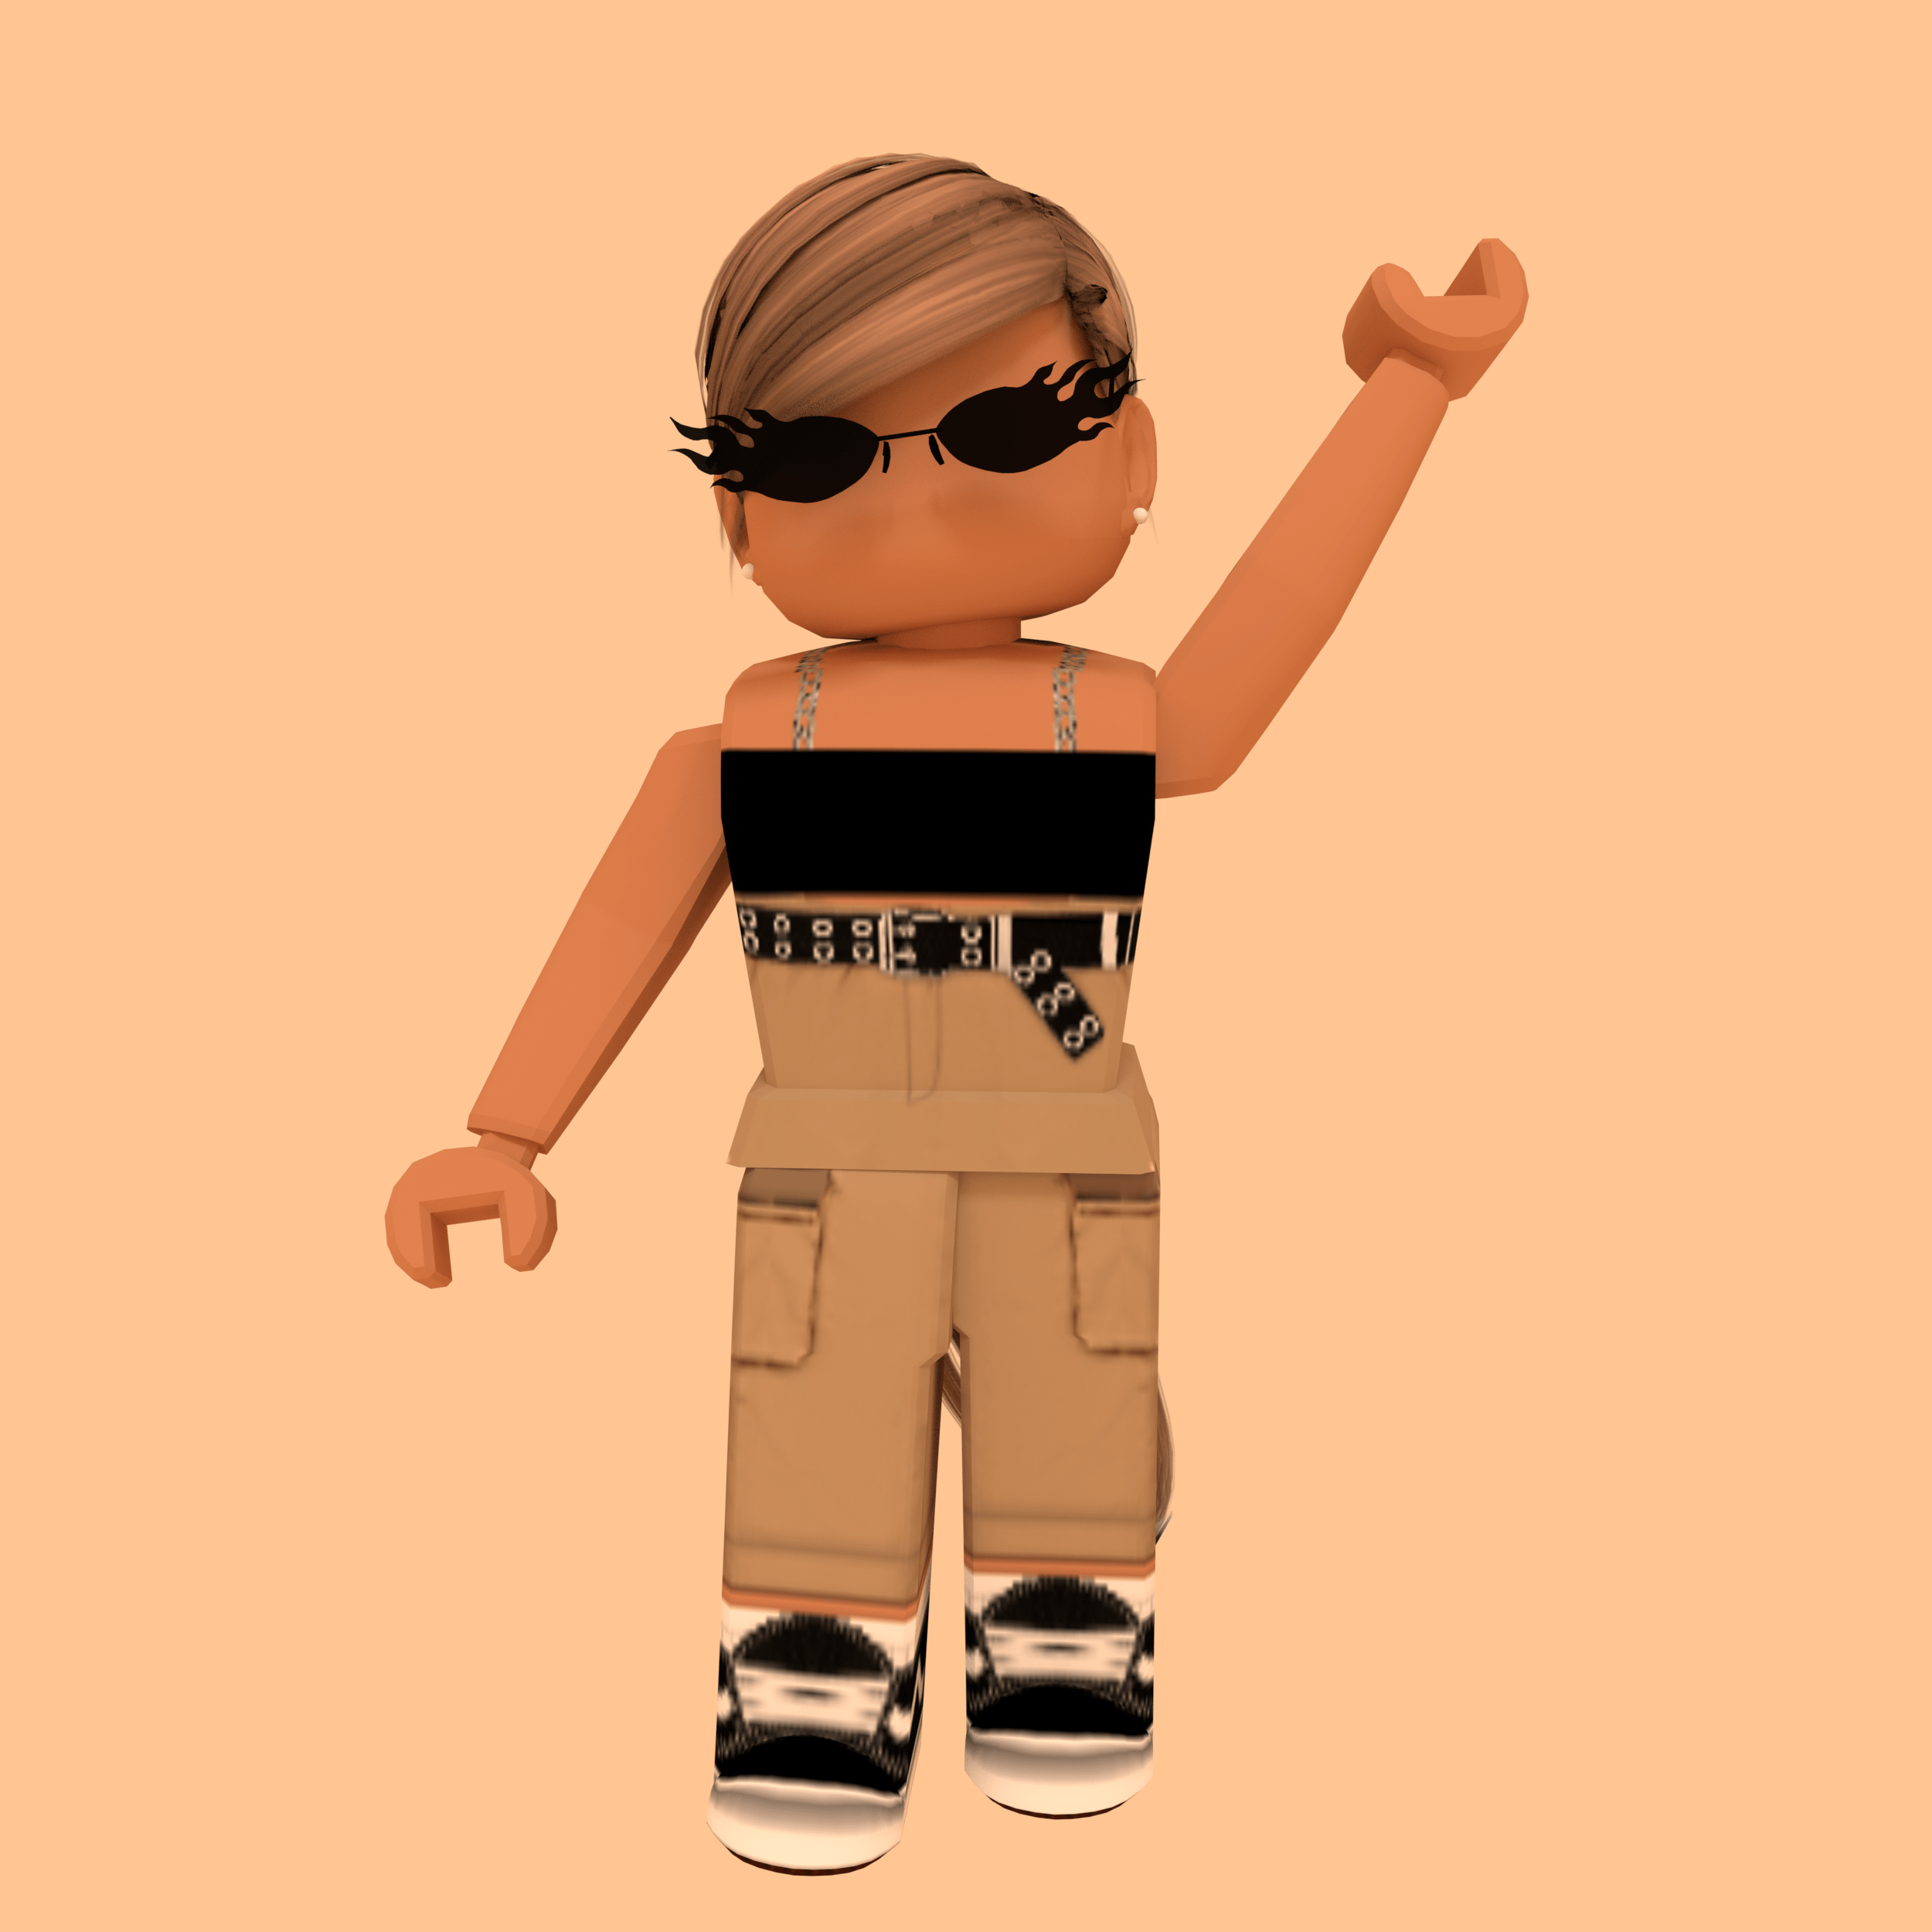 Cute Roblox Picture Aesthetic / Summer Day So Hot Roblox Animation Roblox Picture Cute Tumblr Wallpaper / To explore more similar HD image on pngitem